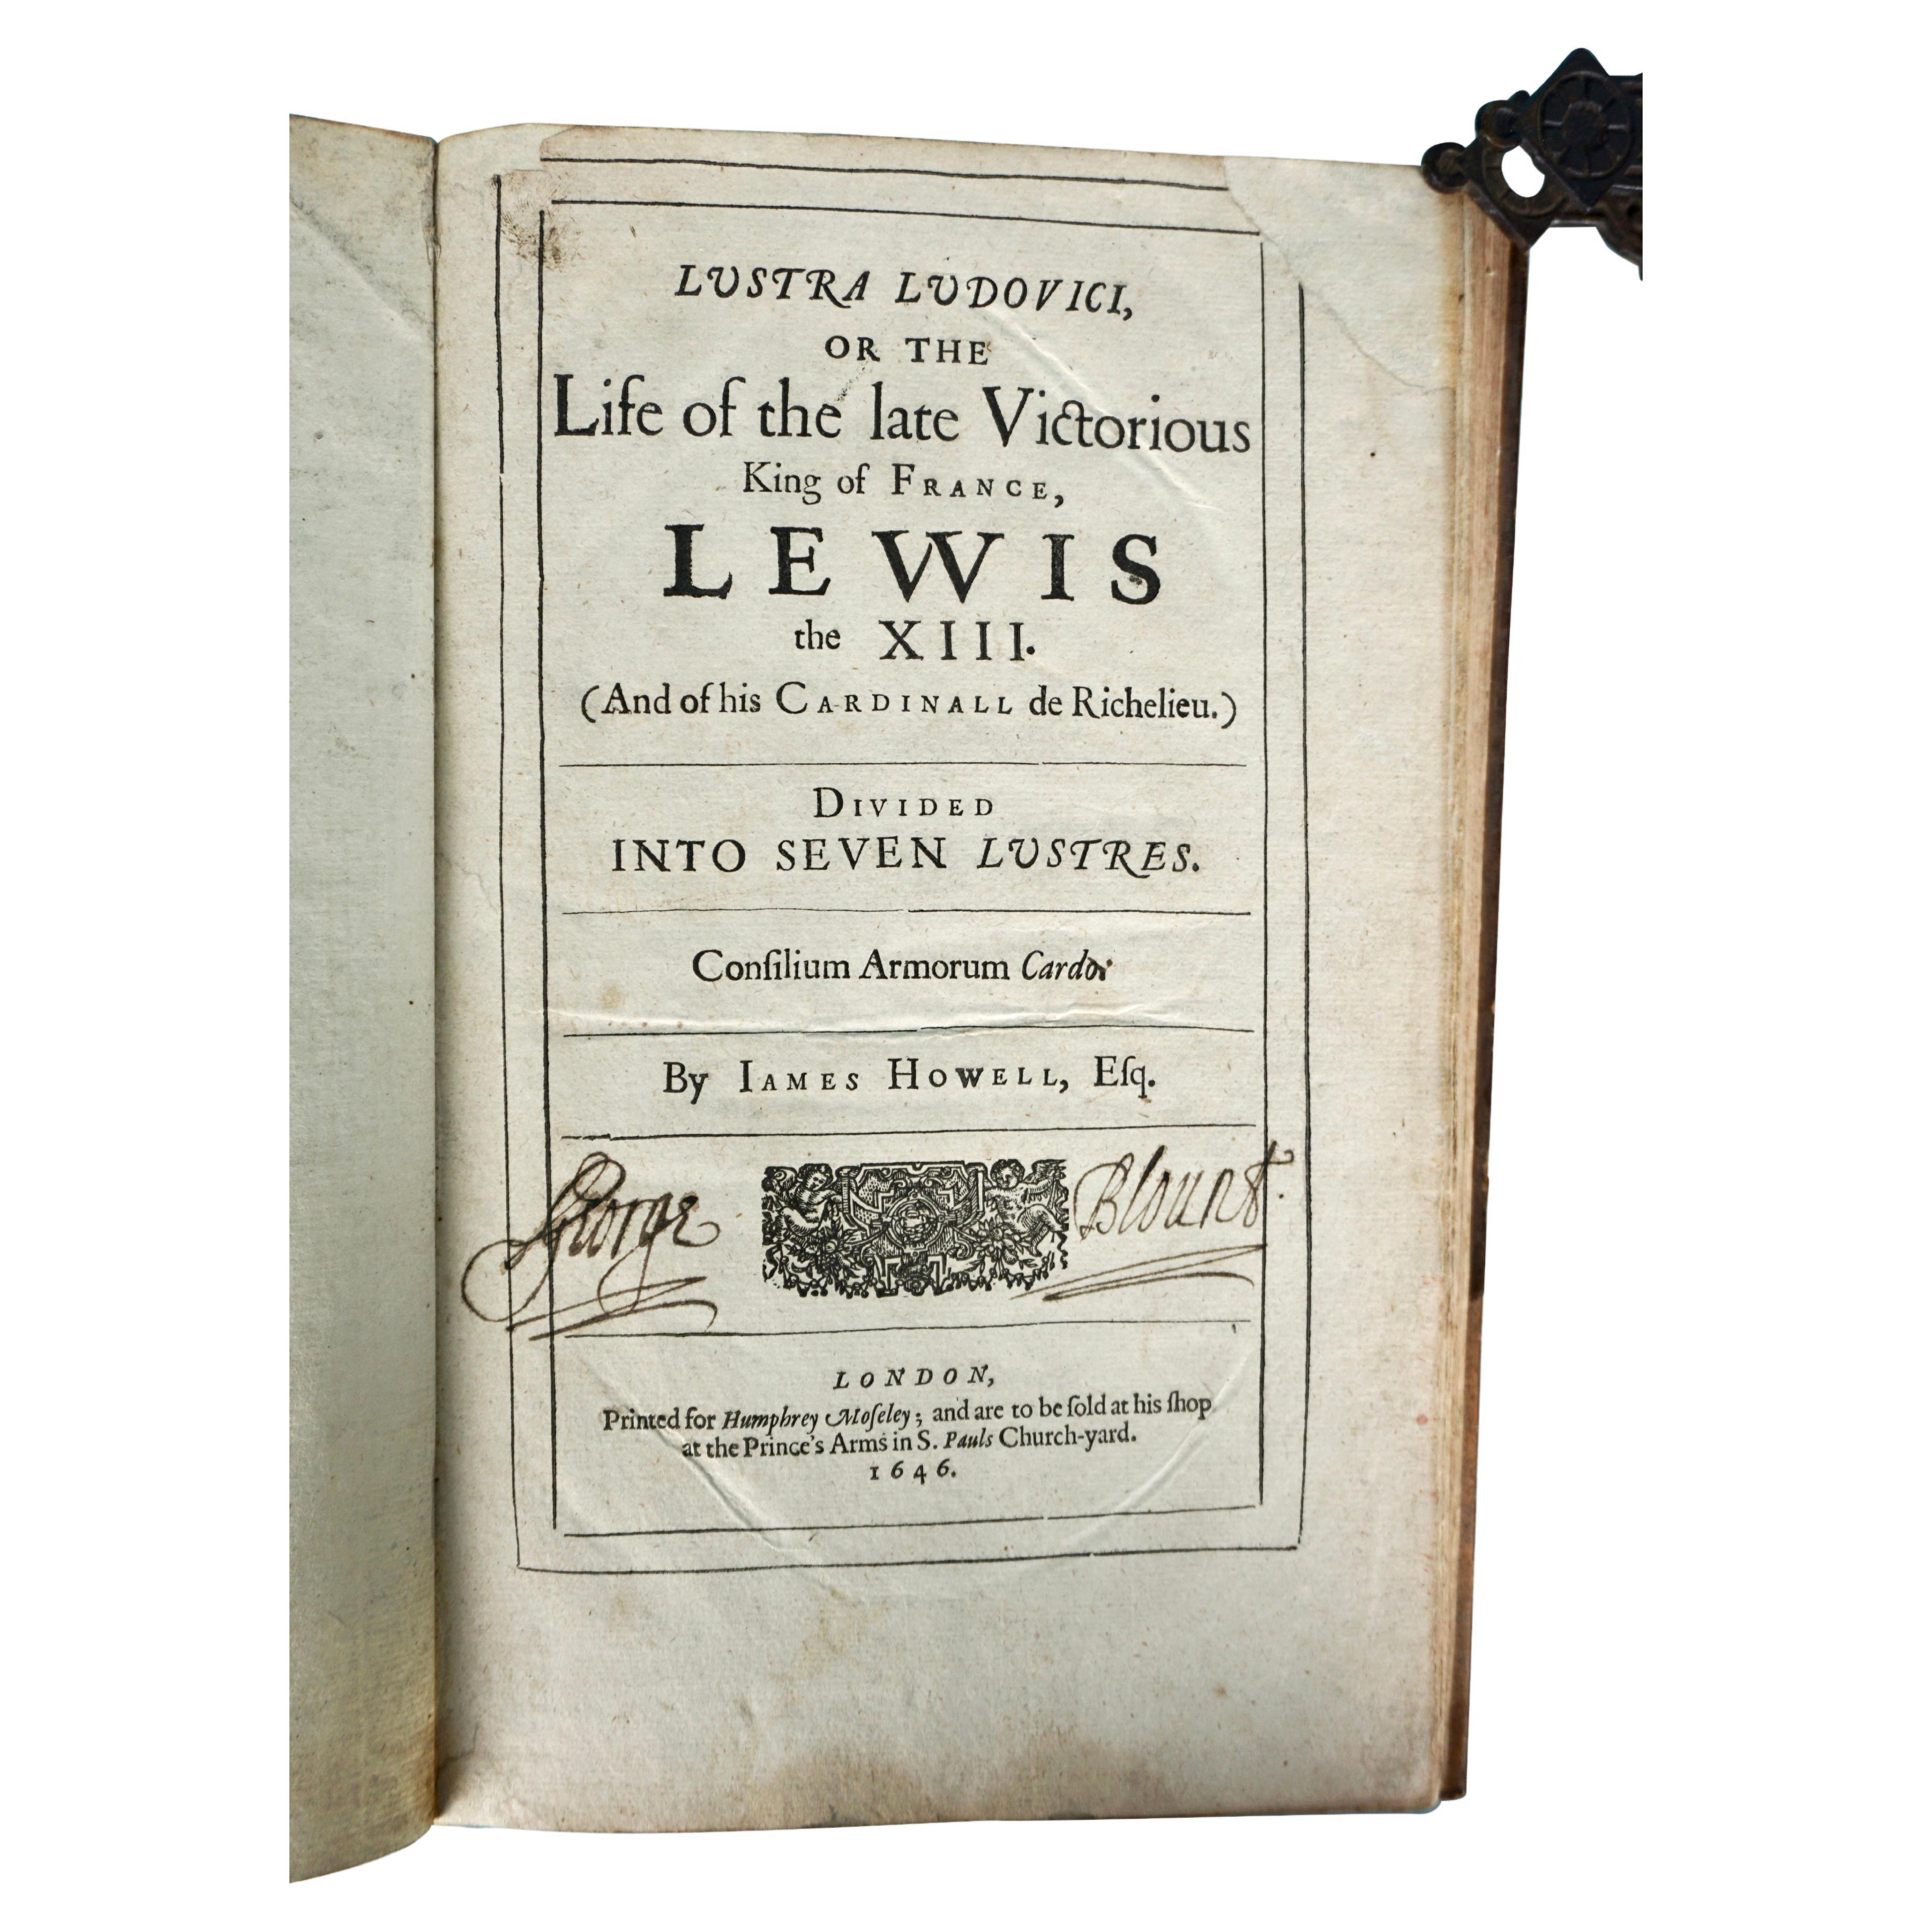 An extensive biography of the life of Louis XIII king of France who ruled from 1610-1643. This volume is the first edition of Howell's work and retains its original full calf leather binding with raised spine and gilt lettering. Owners ink signature